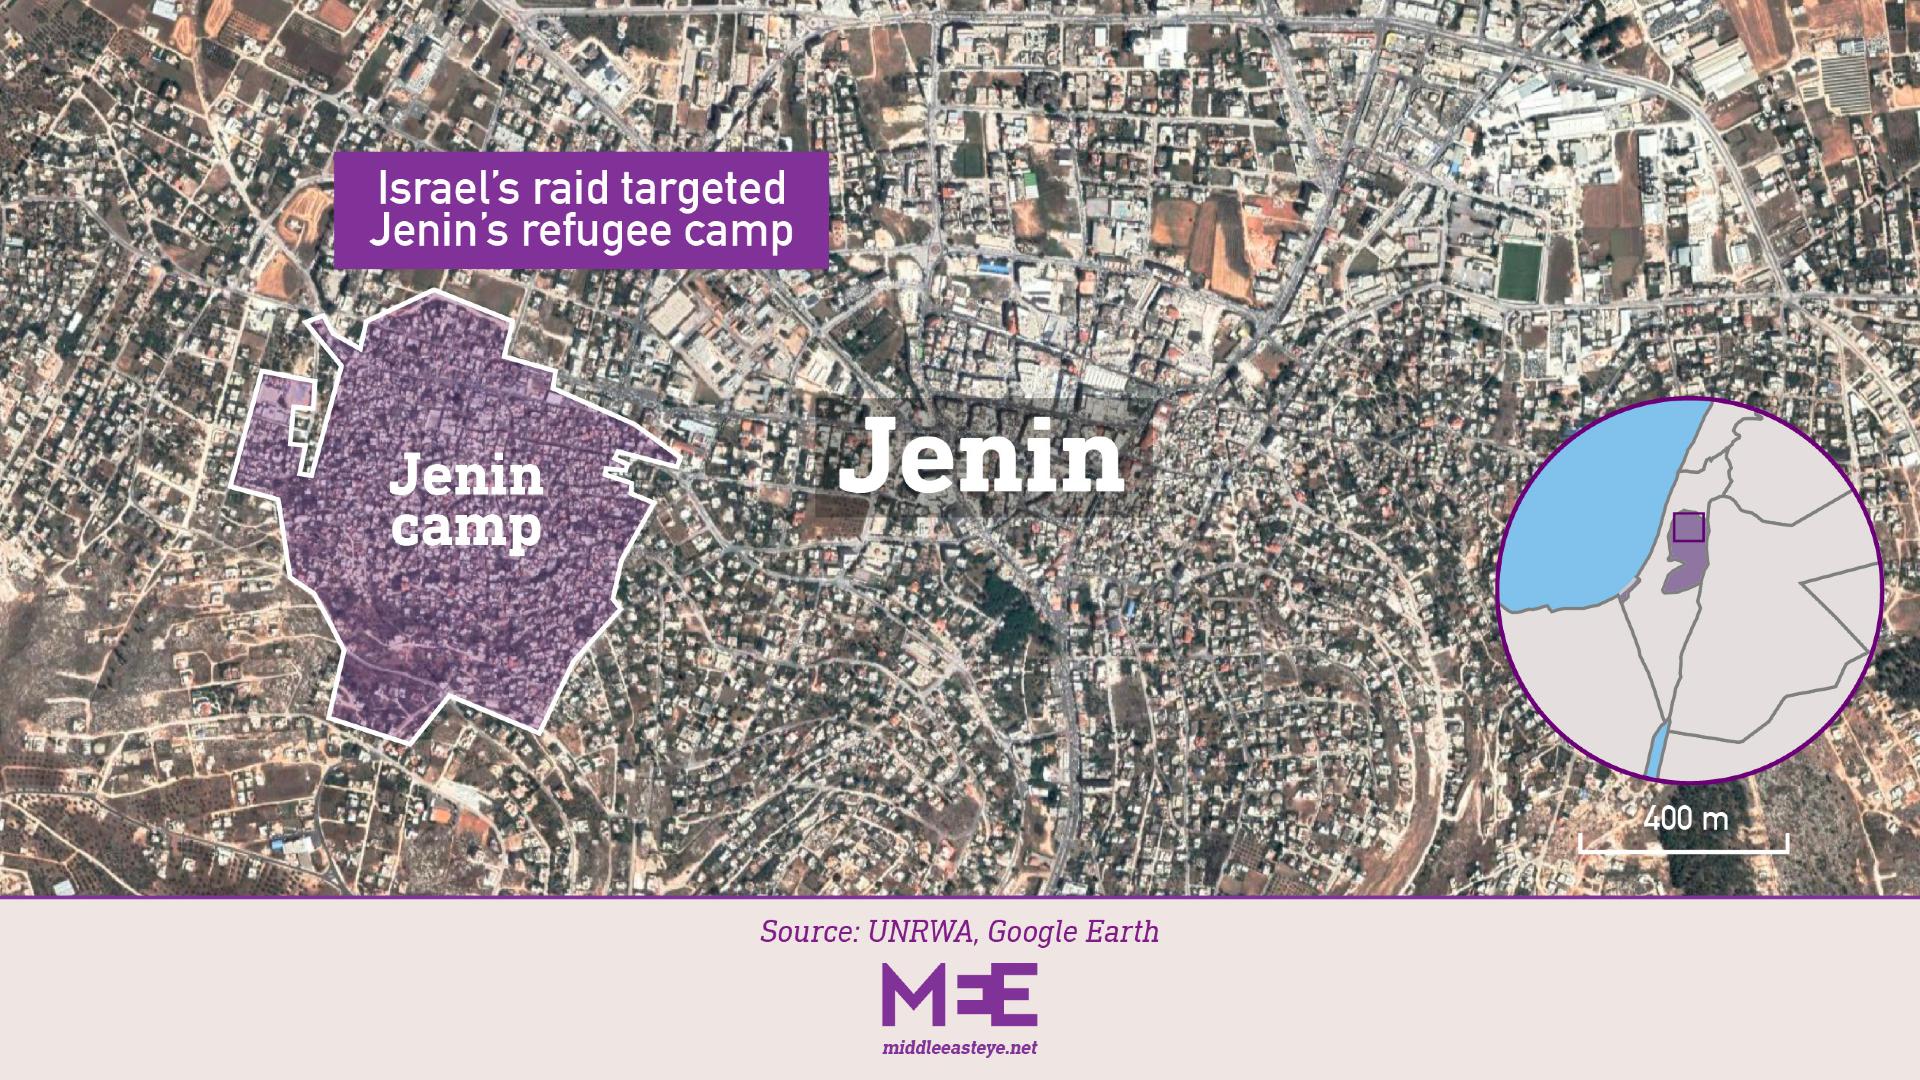 The Jenin refugee camp has become a regular site of Israeli incursions